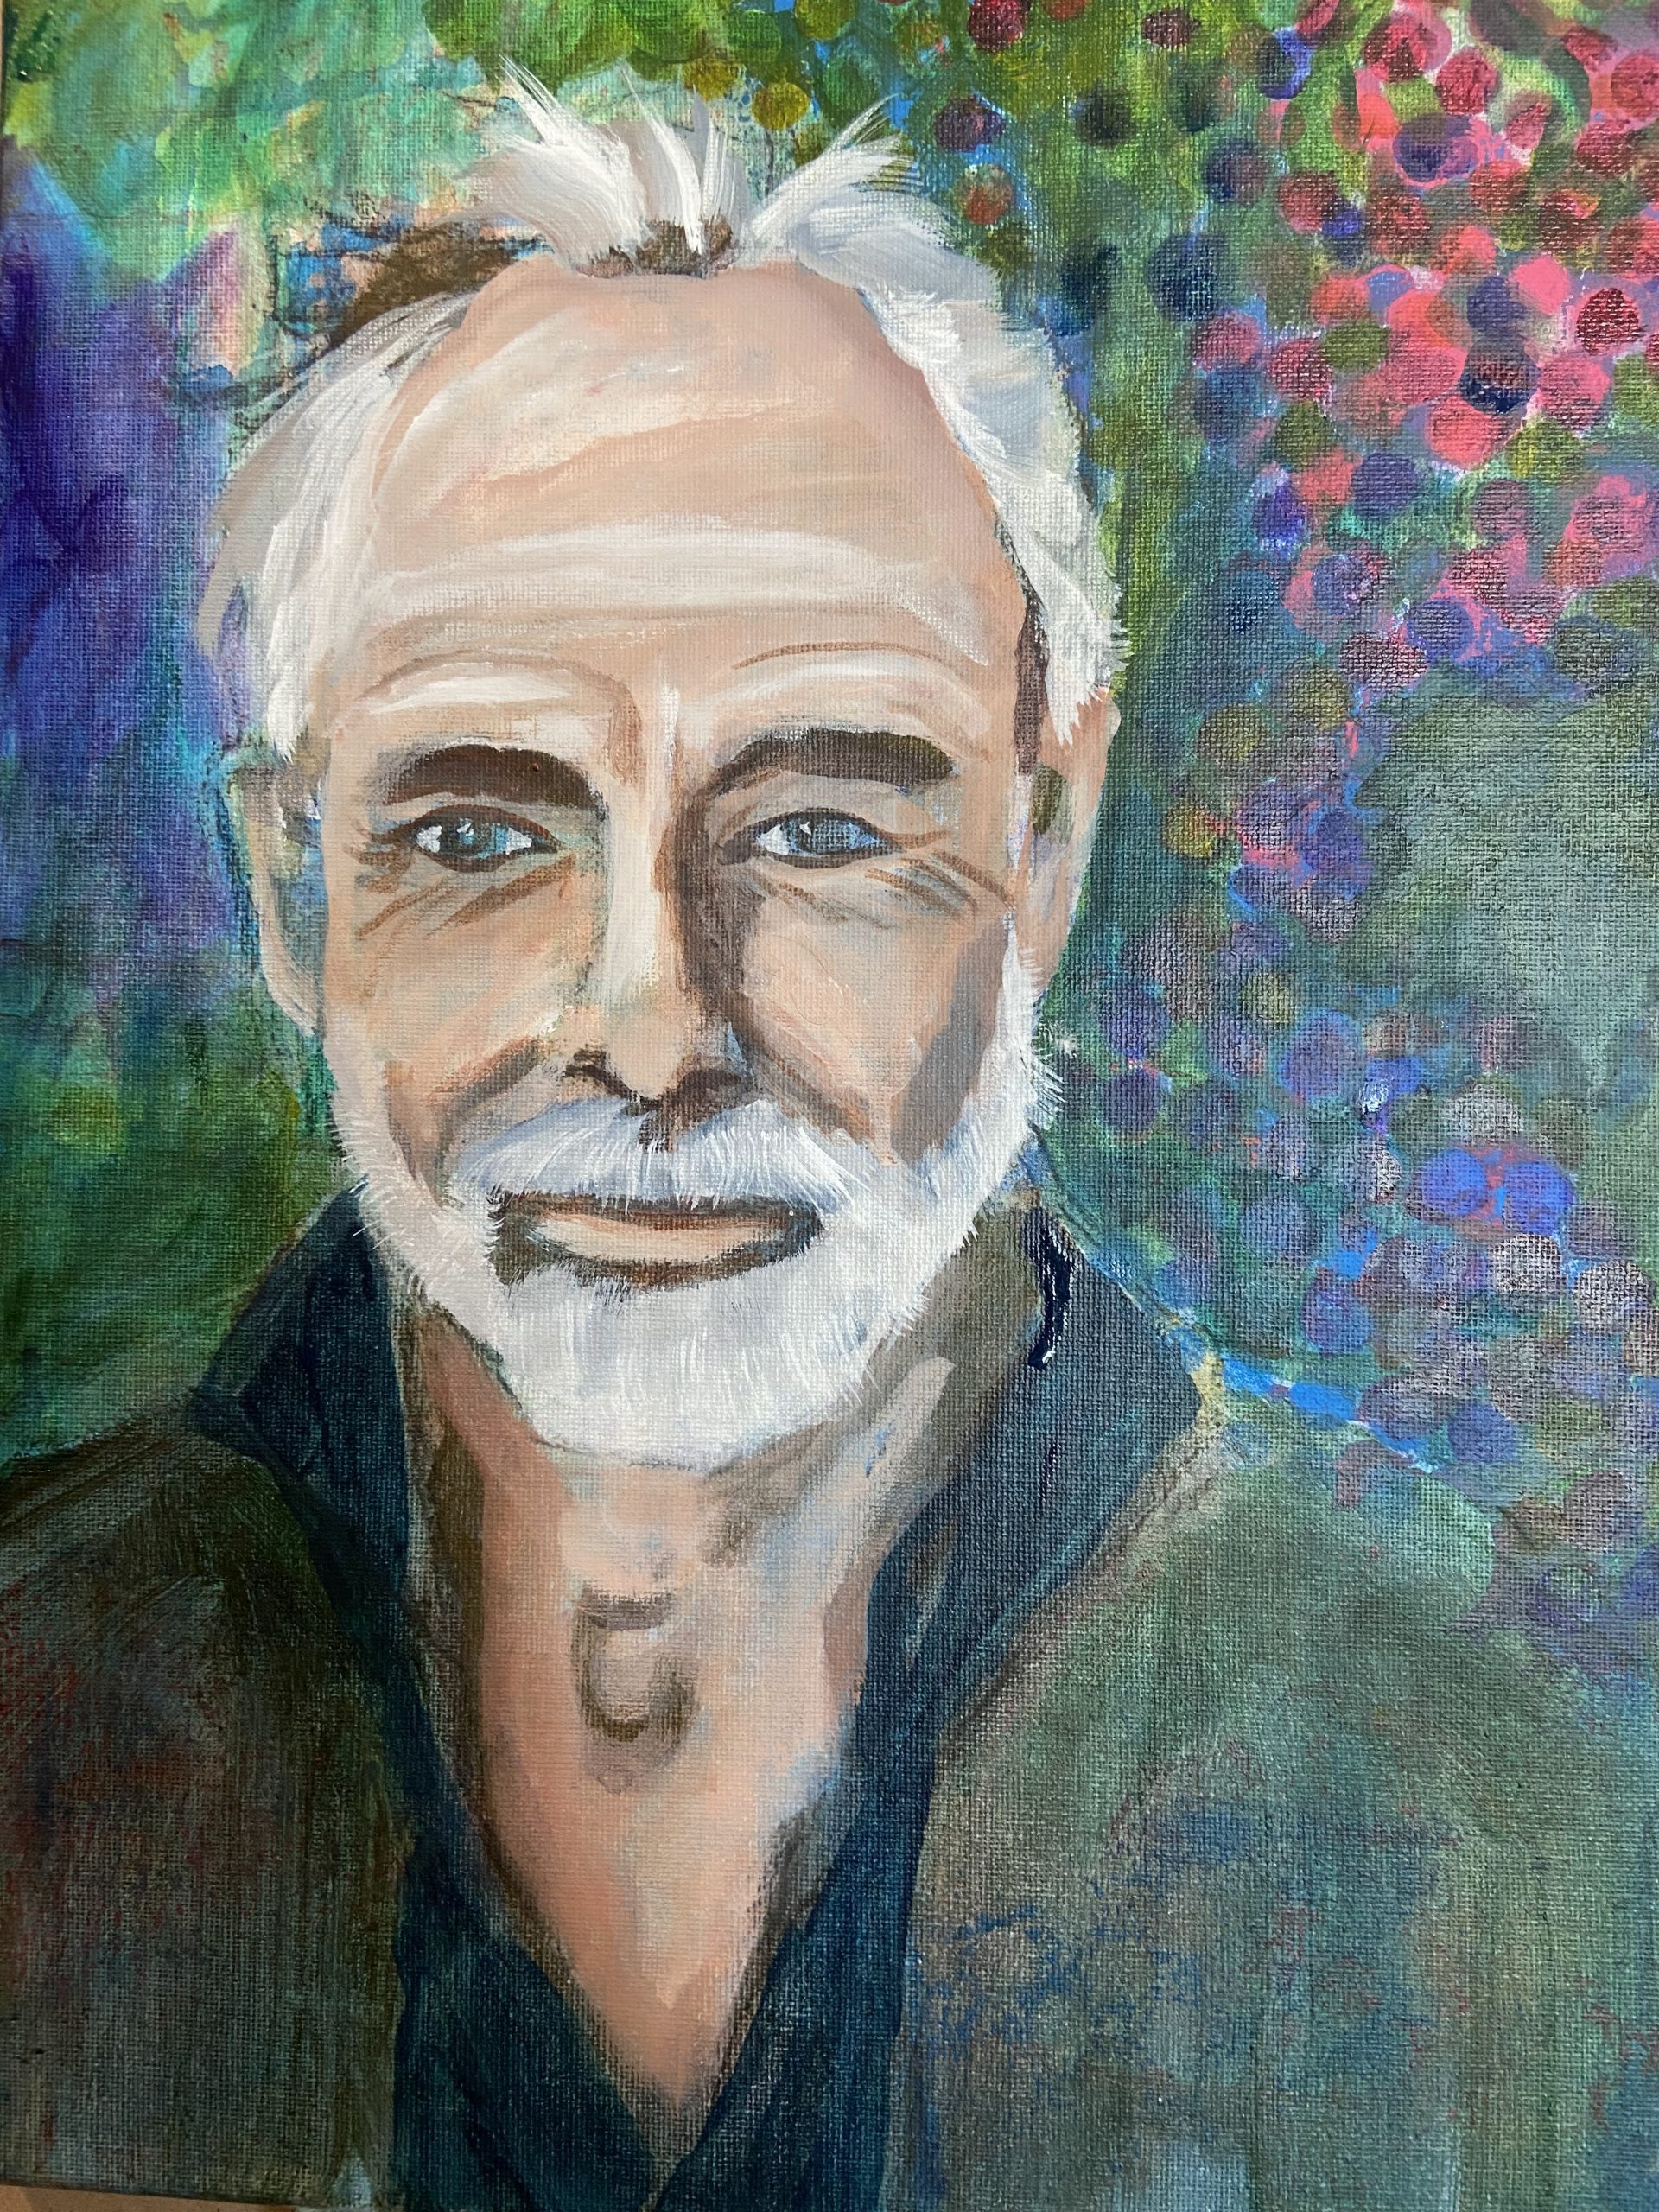 Portrait of a mature man surrounded by grapes done in acrylic paint